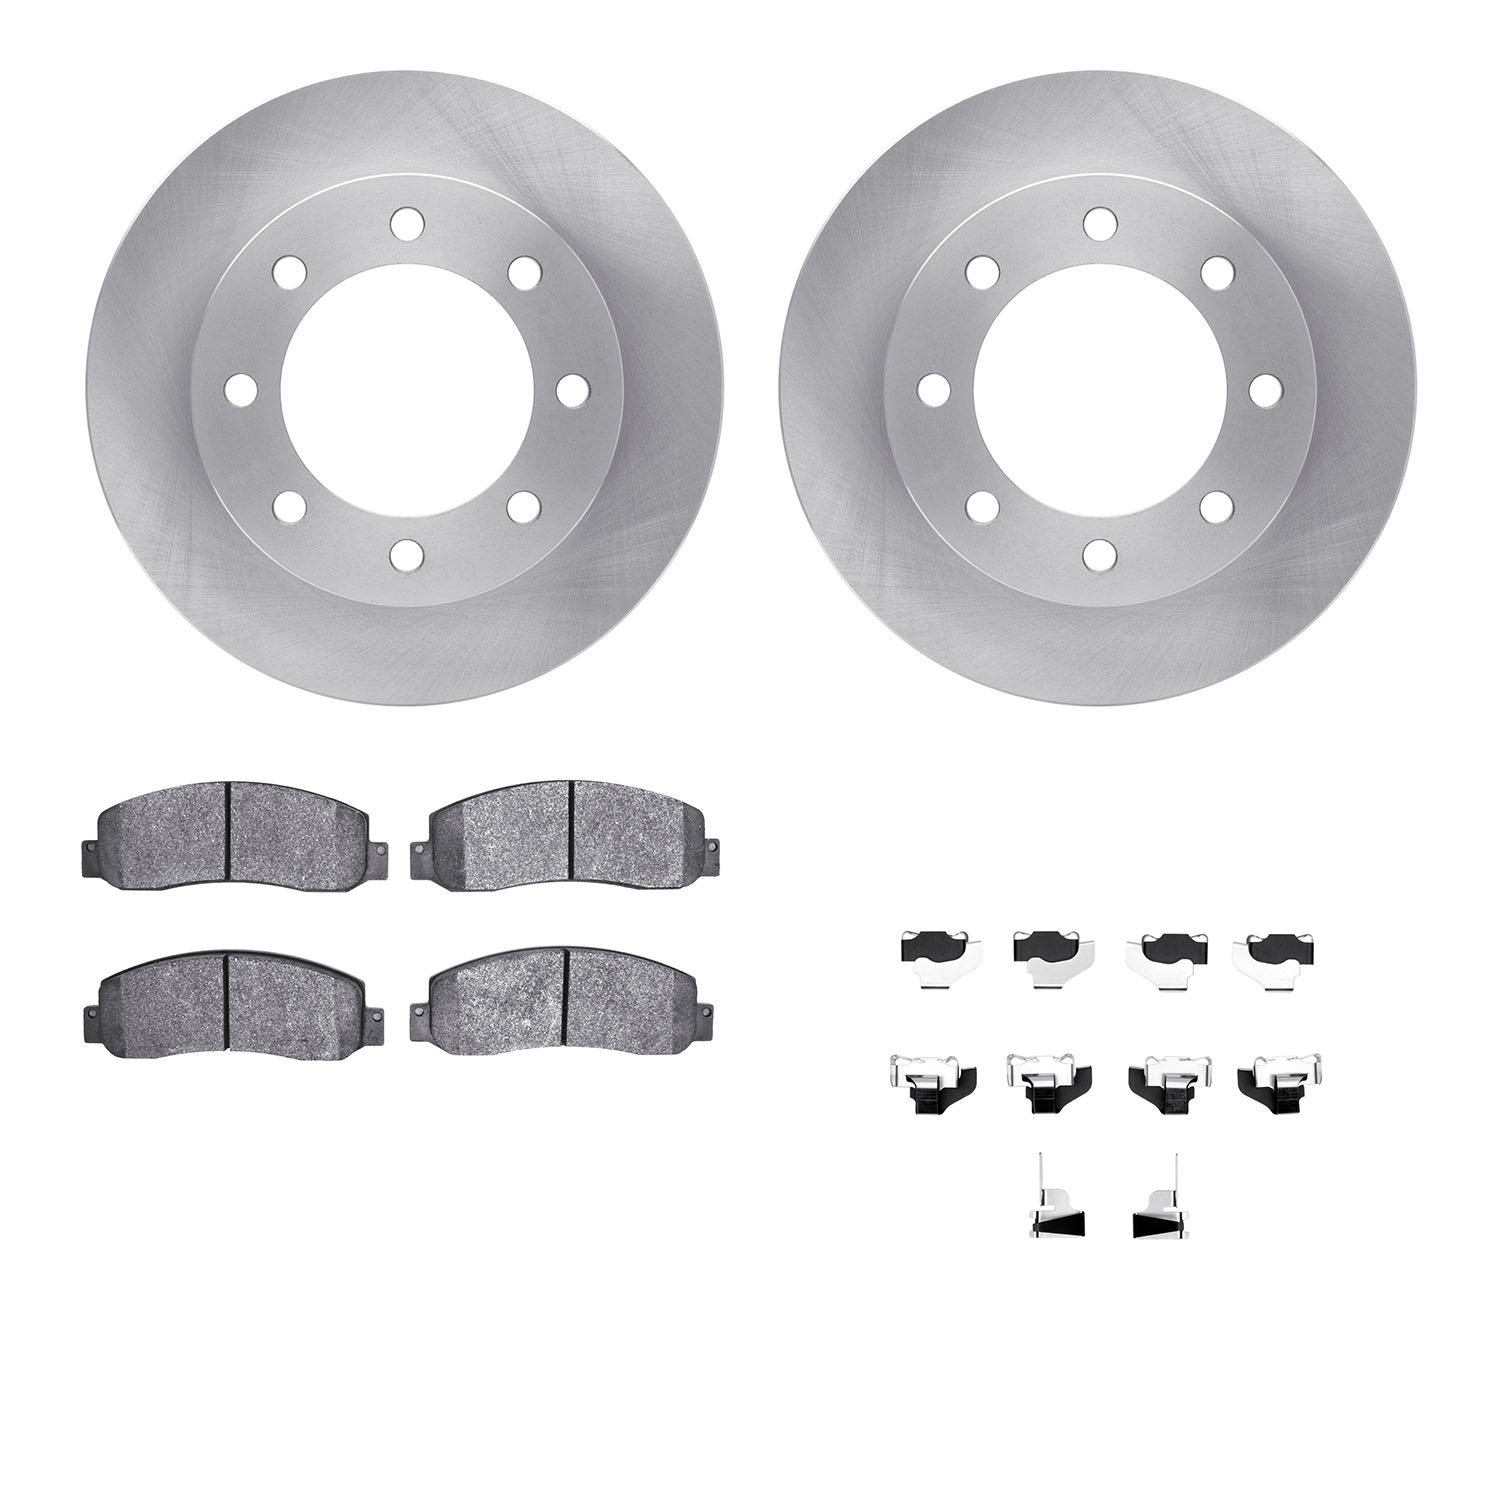 6412-54239 Brake Rotors with Ultimate-Duty Brake Pads Kit & Hardware, 2005-2011 Ford/Lincoln/Mercury/Mazda, Position: Front